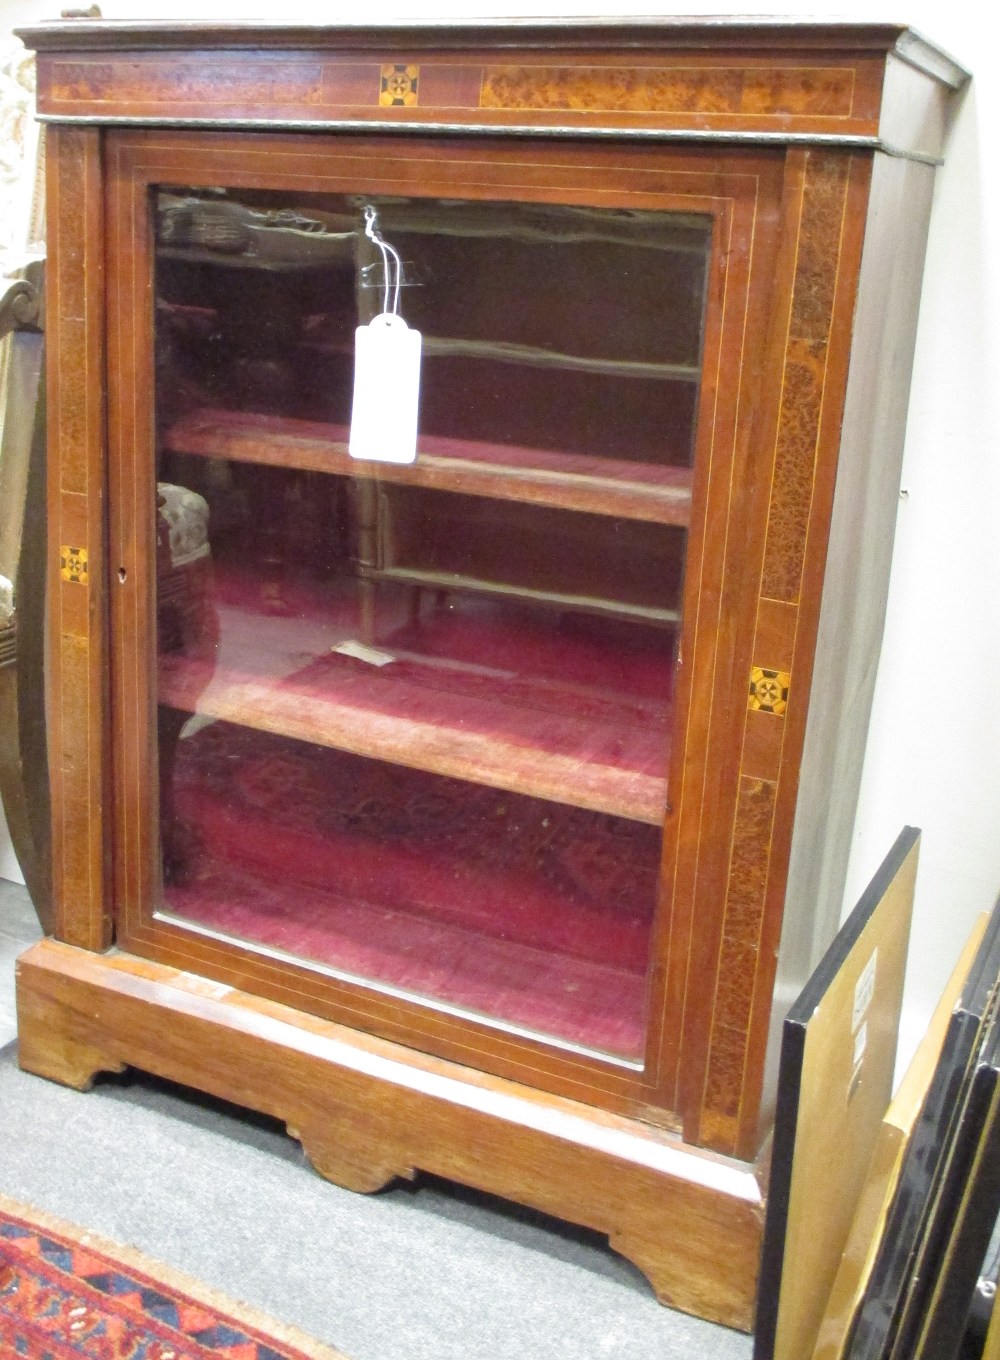 A Victorian walnut pier cabinet, inlaid and banded in yew wood 102 x 77 x 30cm (40 x 30 x 12in)